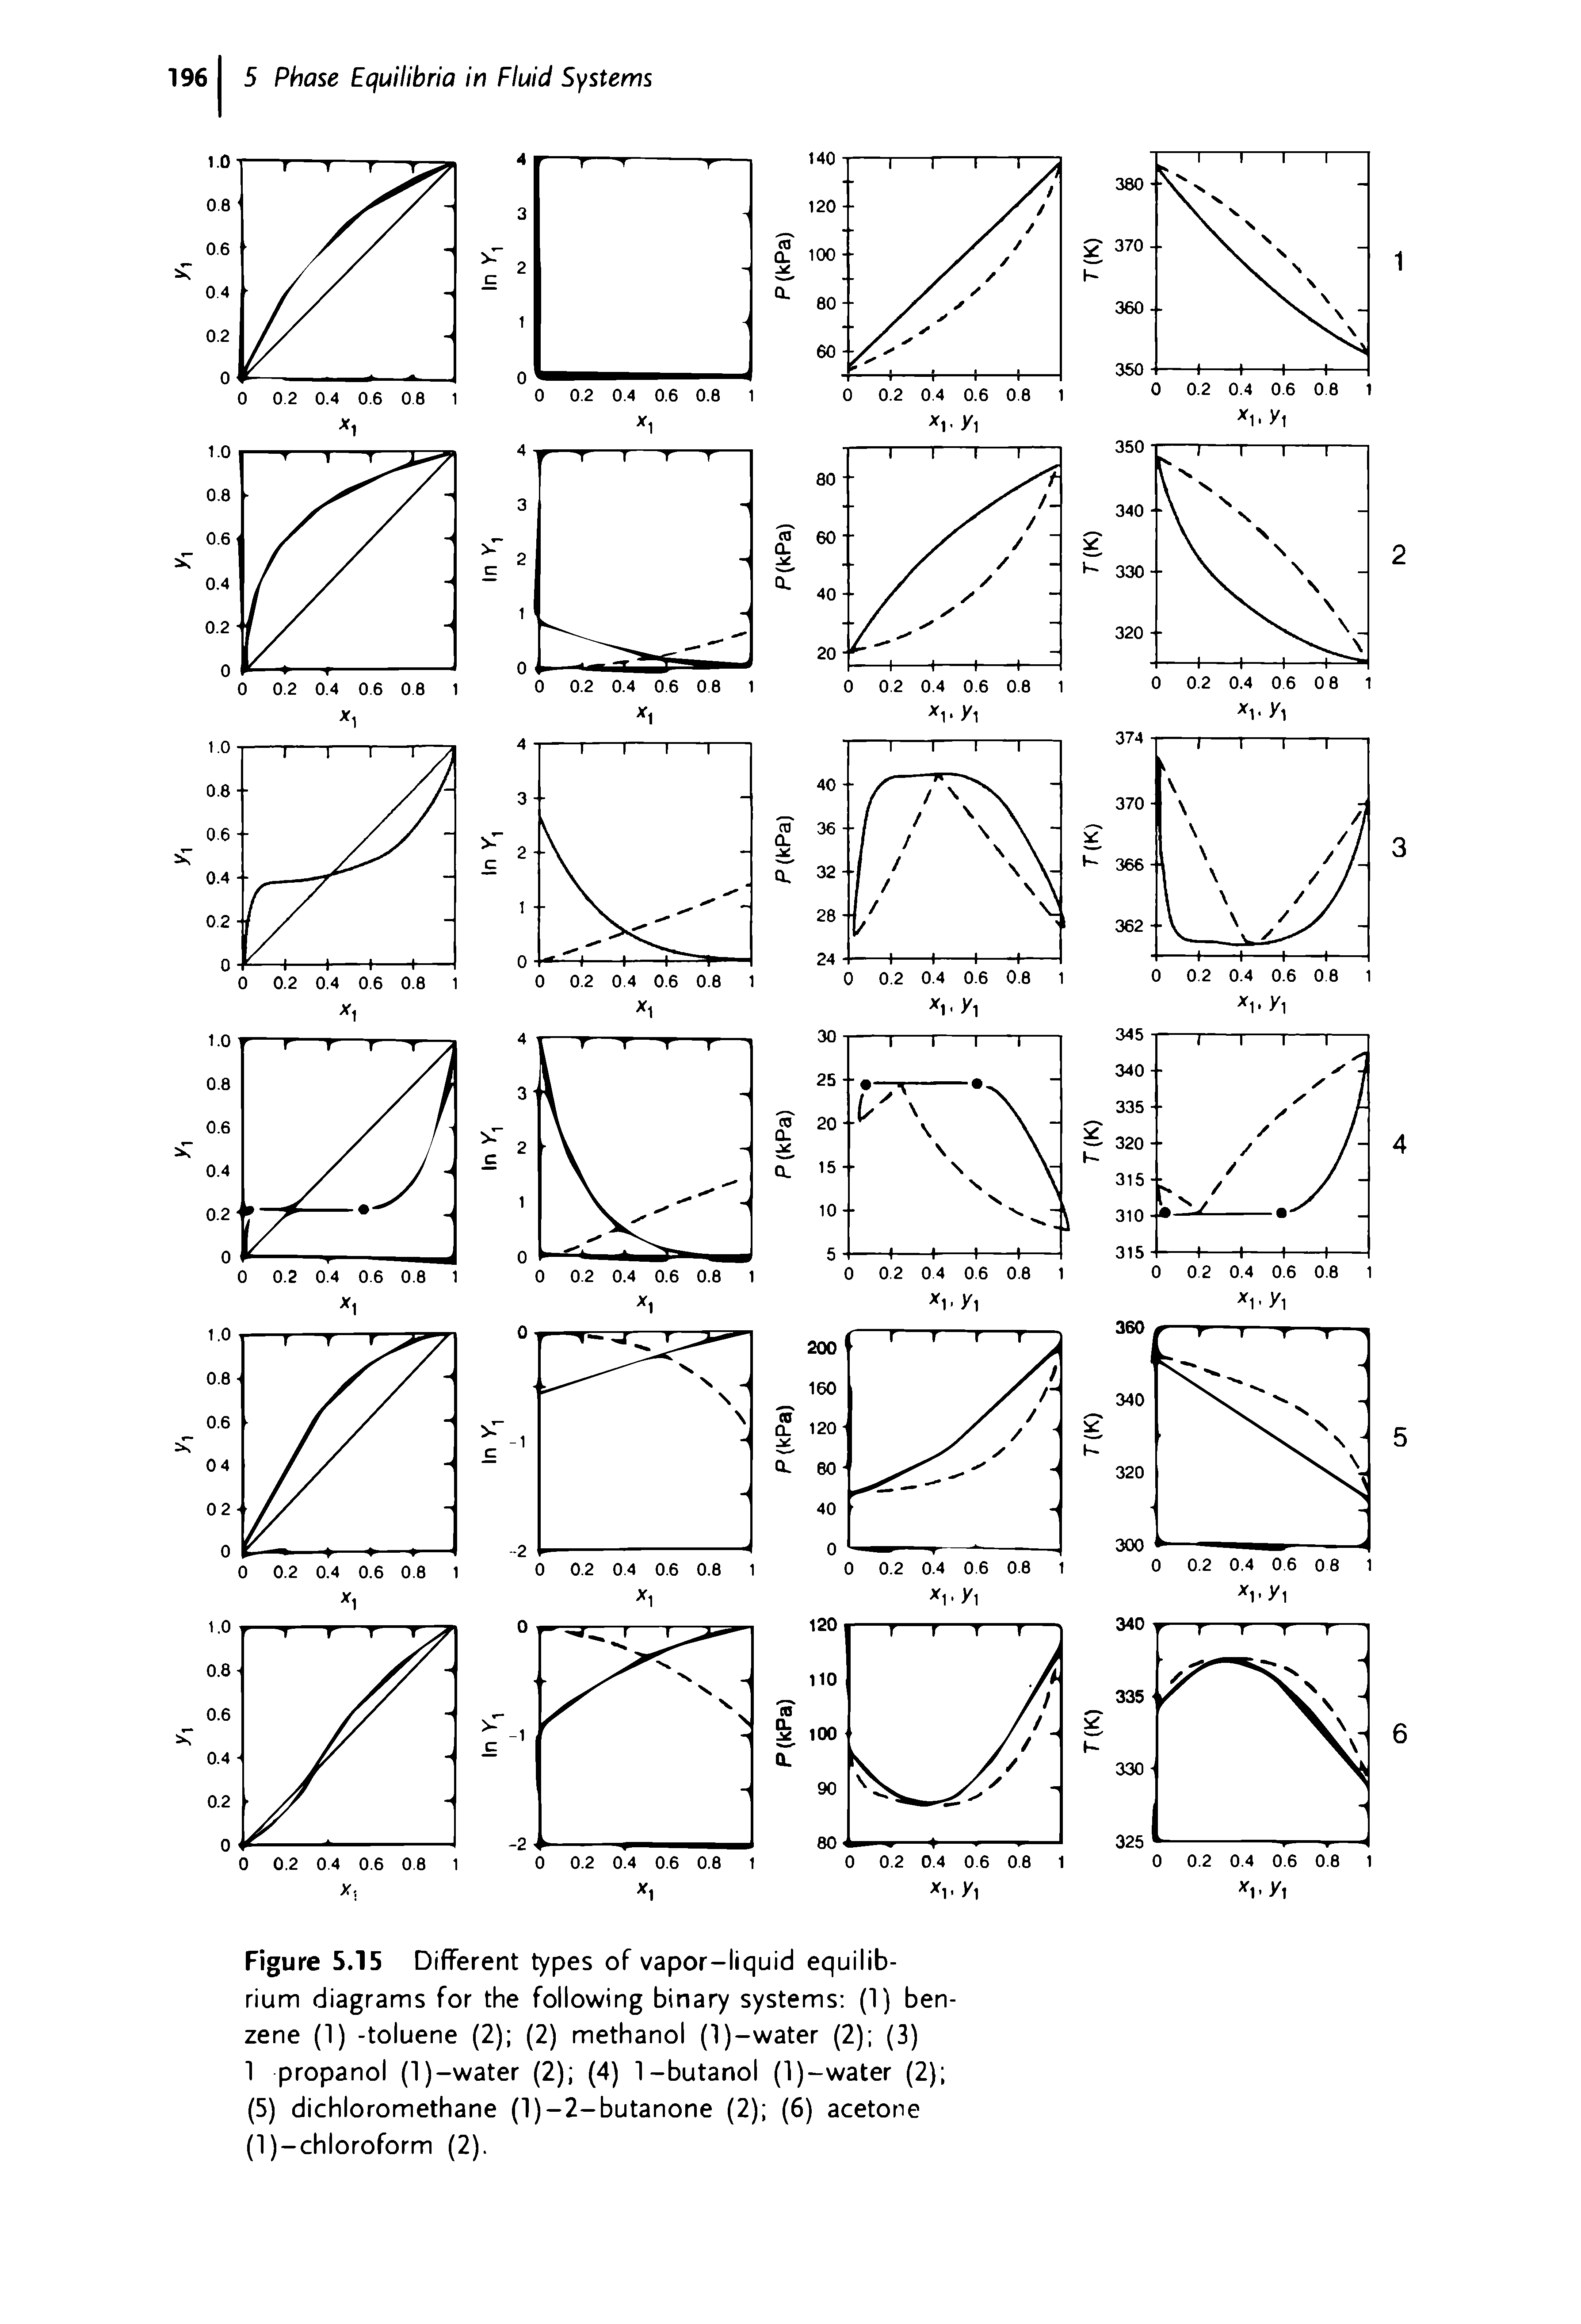 Figure 5.15 Different types of vapor-liquid equilibrium diagrams for the following binary systems (1) benzene (1) -toluene (2) (2) methanol (l)-water (2) (3)...